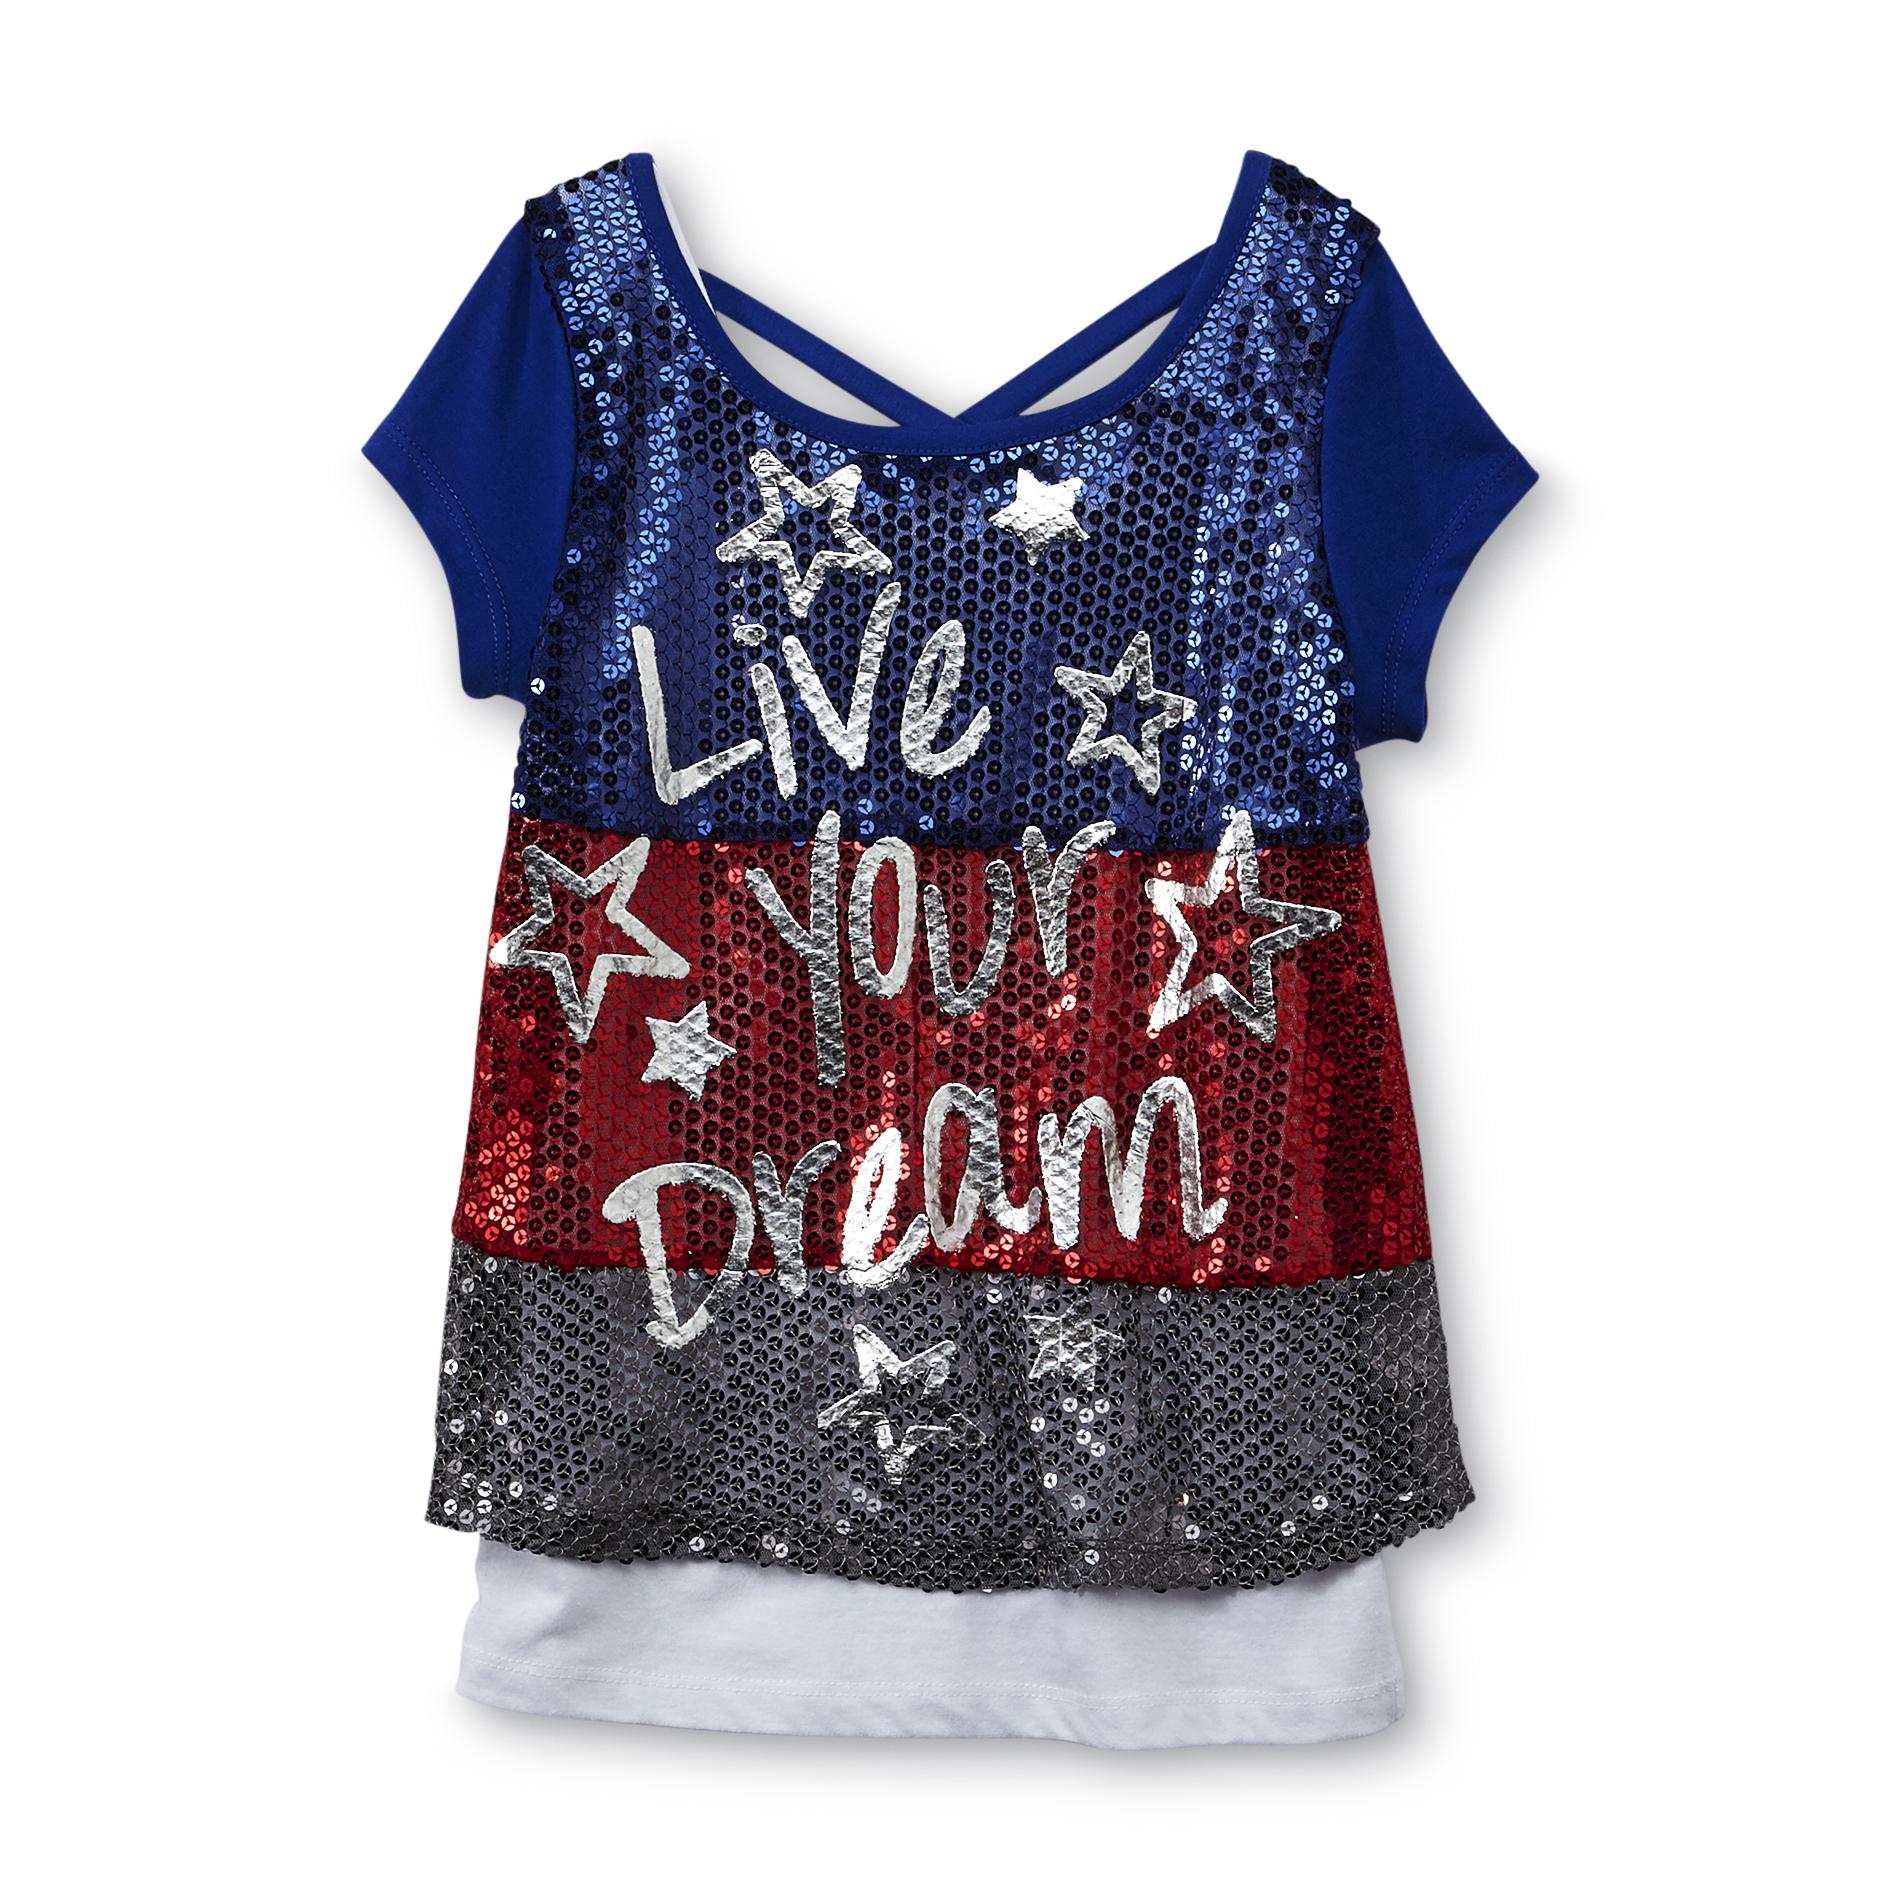 Piper Girl's Embellished Top & Tank Top - Live Your Dream